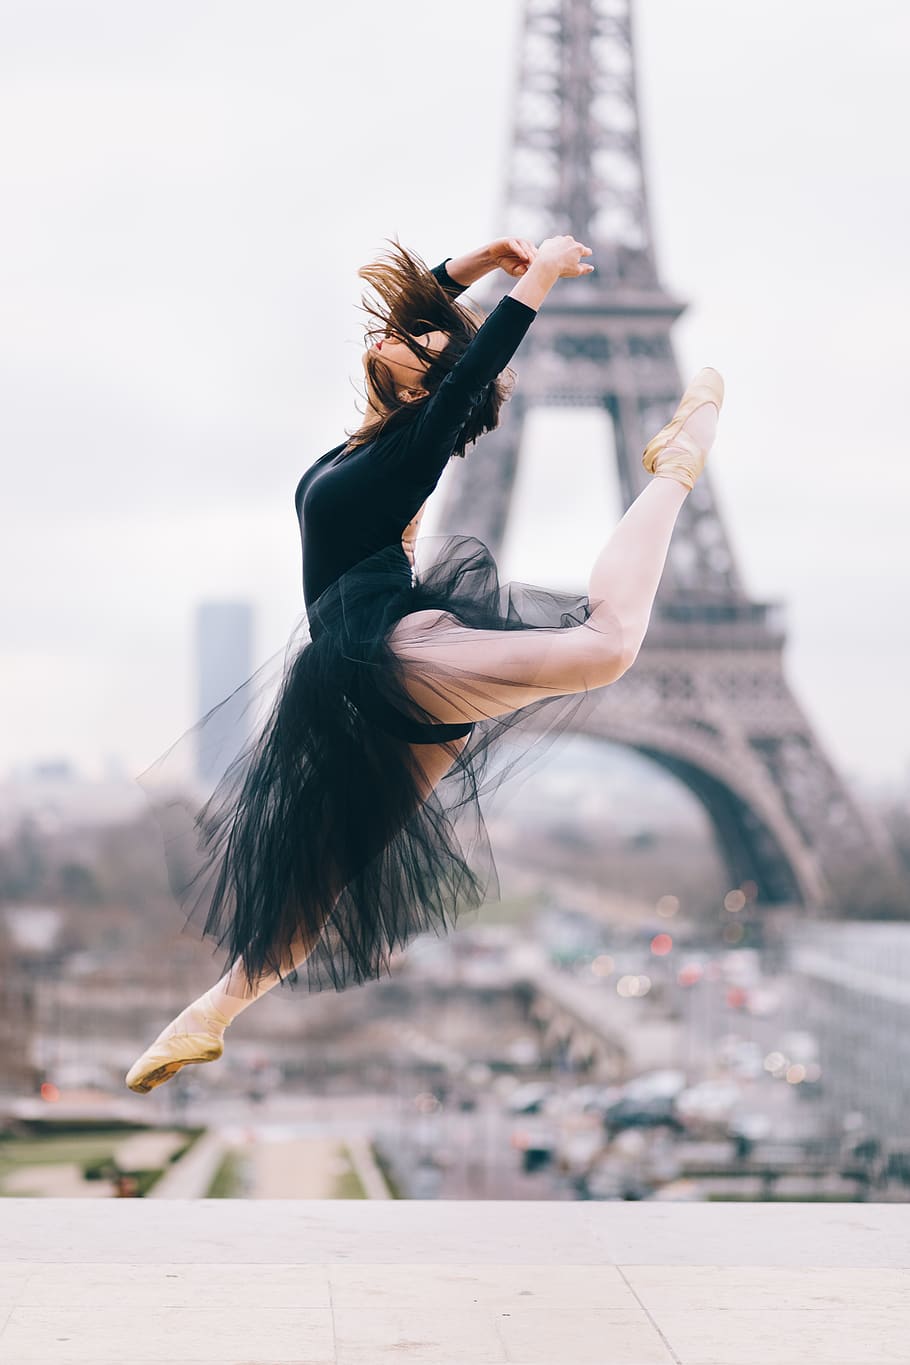 HD wallpaper: Ballet Dancer Performing Stunt With Eiffel Tower Background,  dancing | Wallpaper Flare